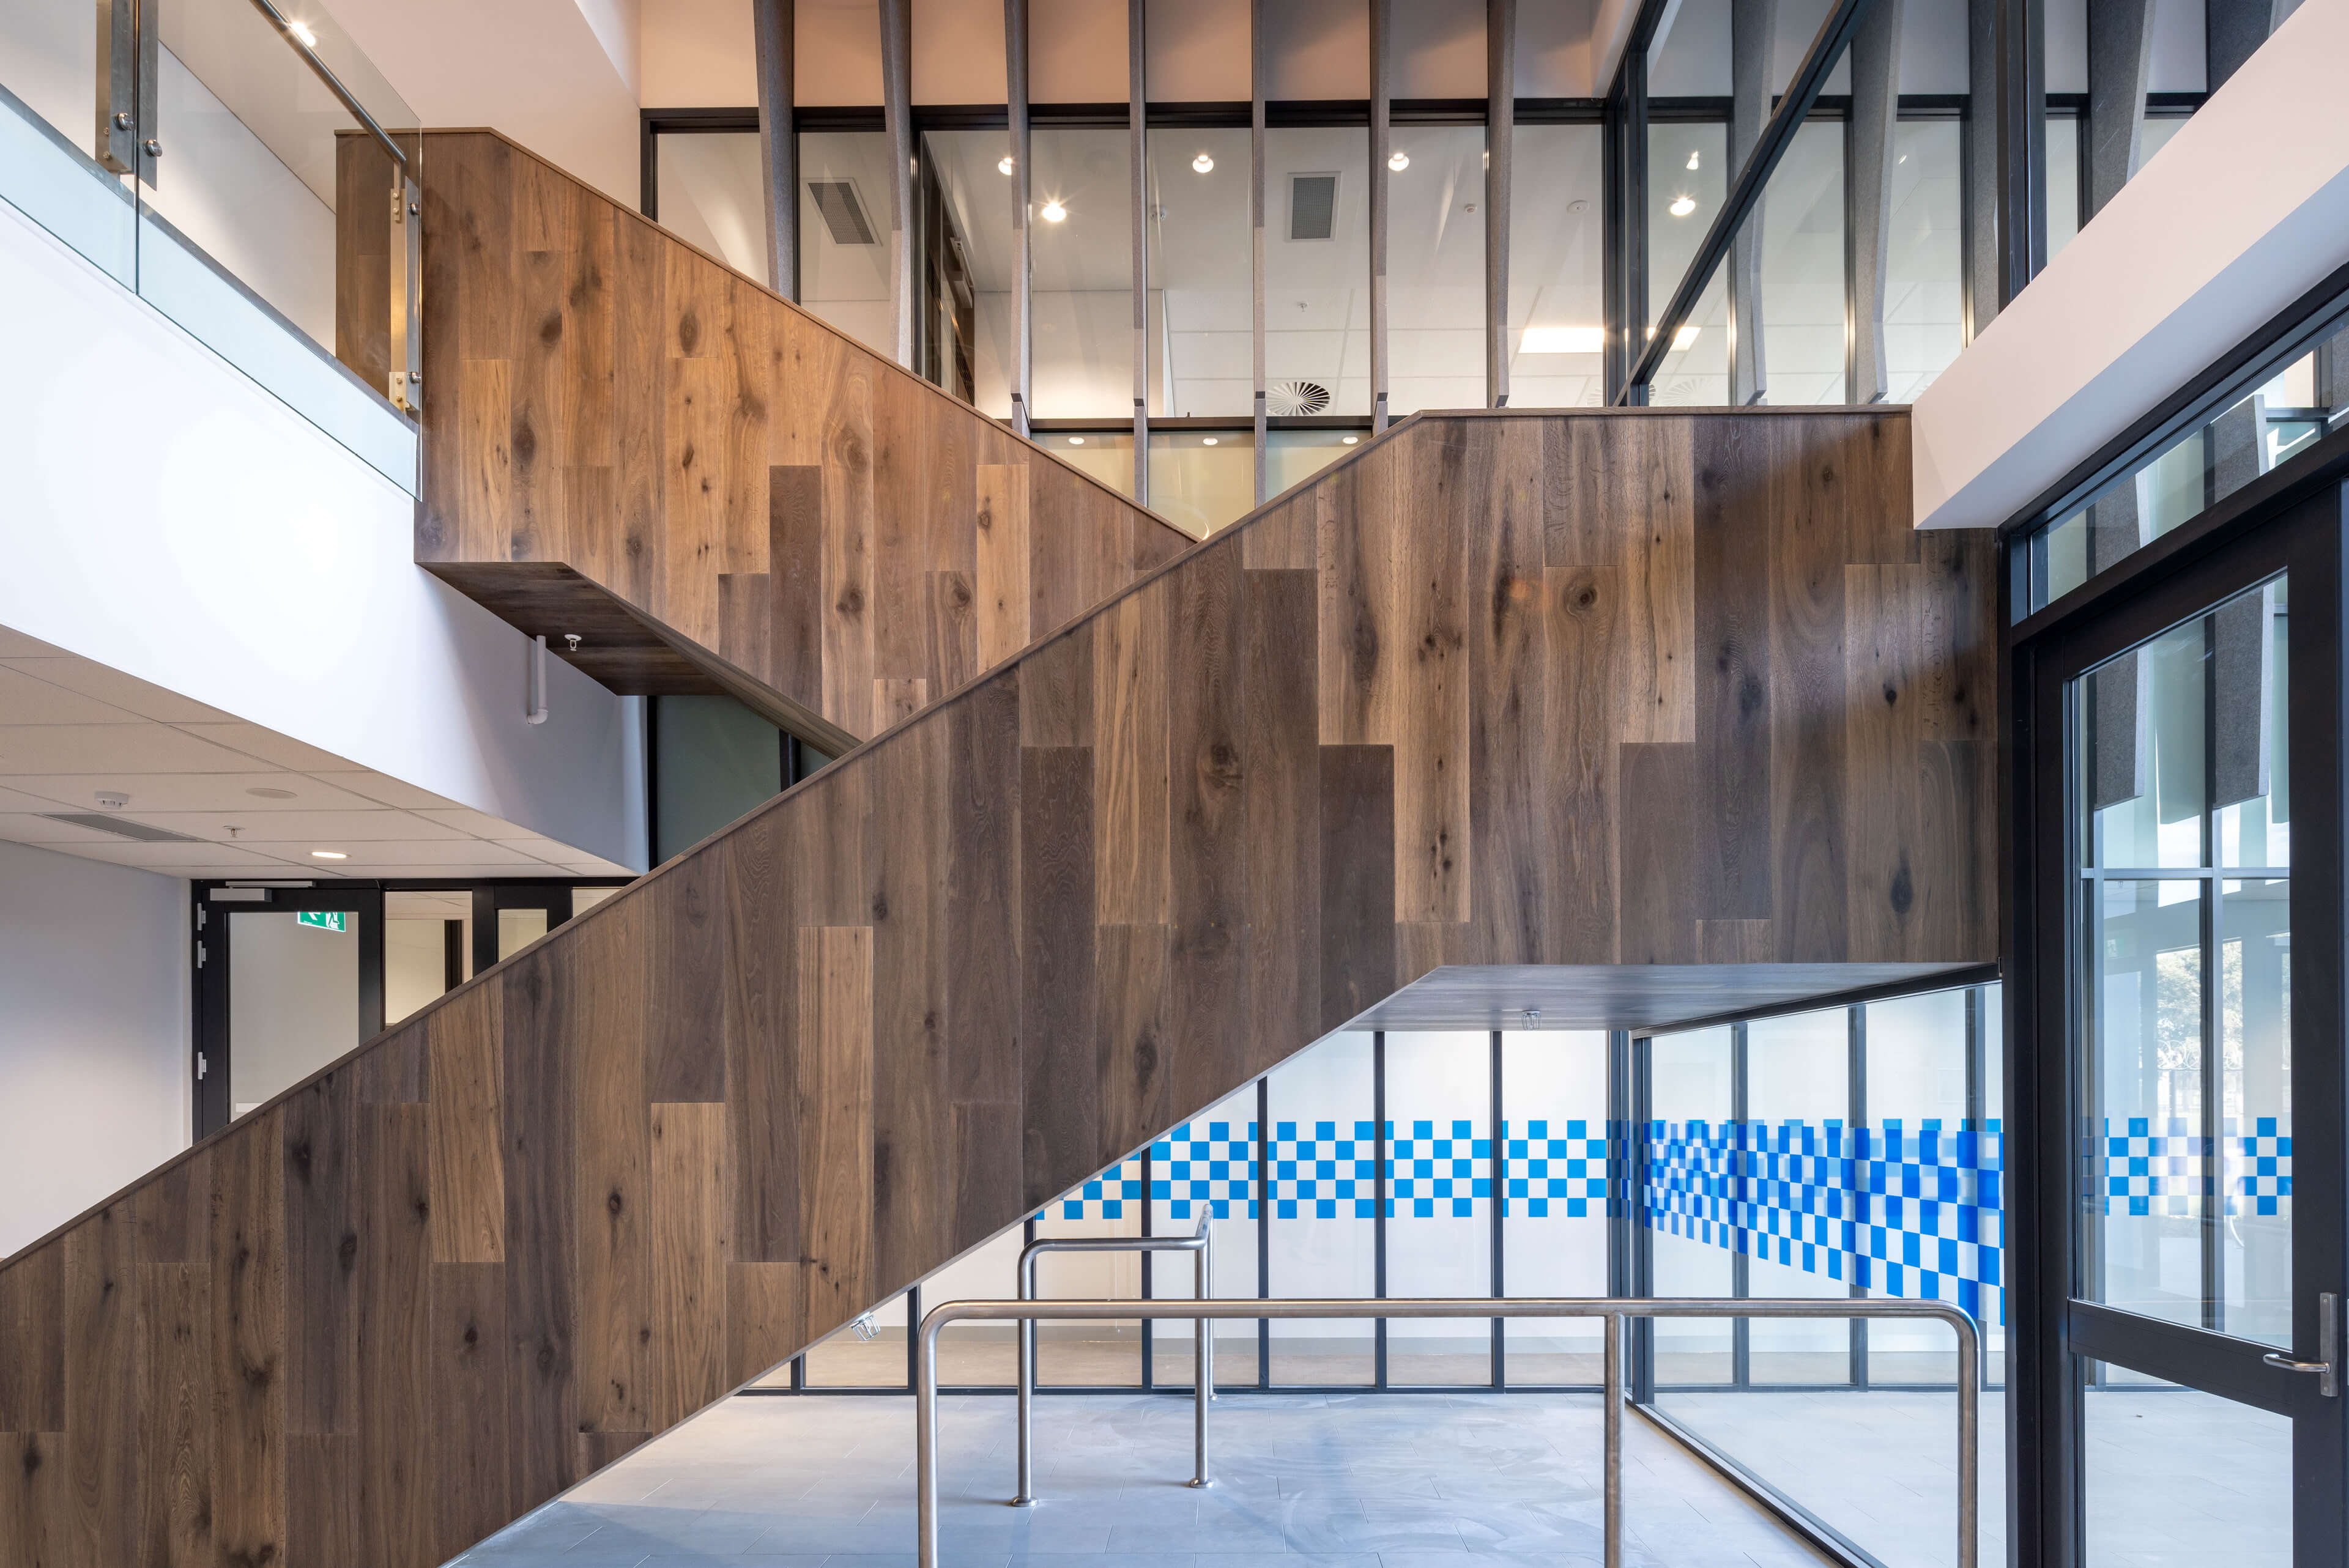 12 interior stair feature construction and fitout of 3000sqm office space at polair facility bankstown taylor construction refurbishment and live environments